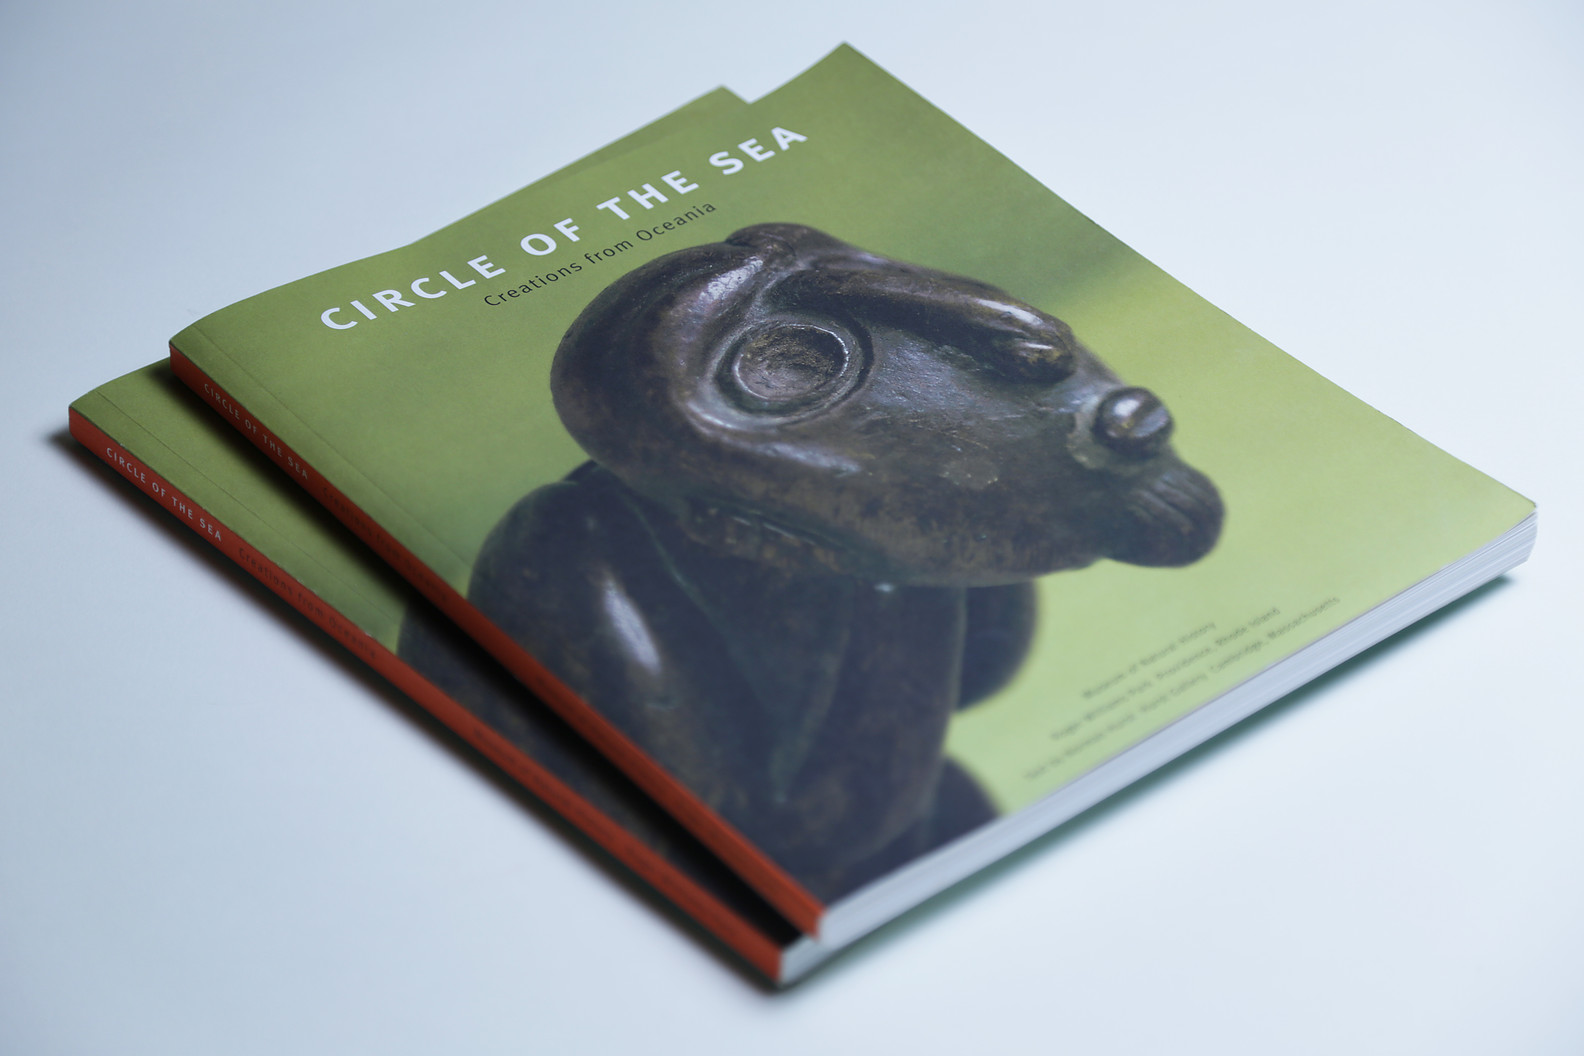 Book design for Circle of the Sea, published by The Museum of Natural History